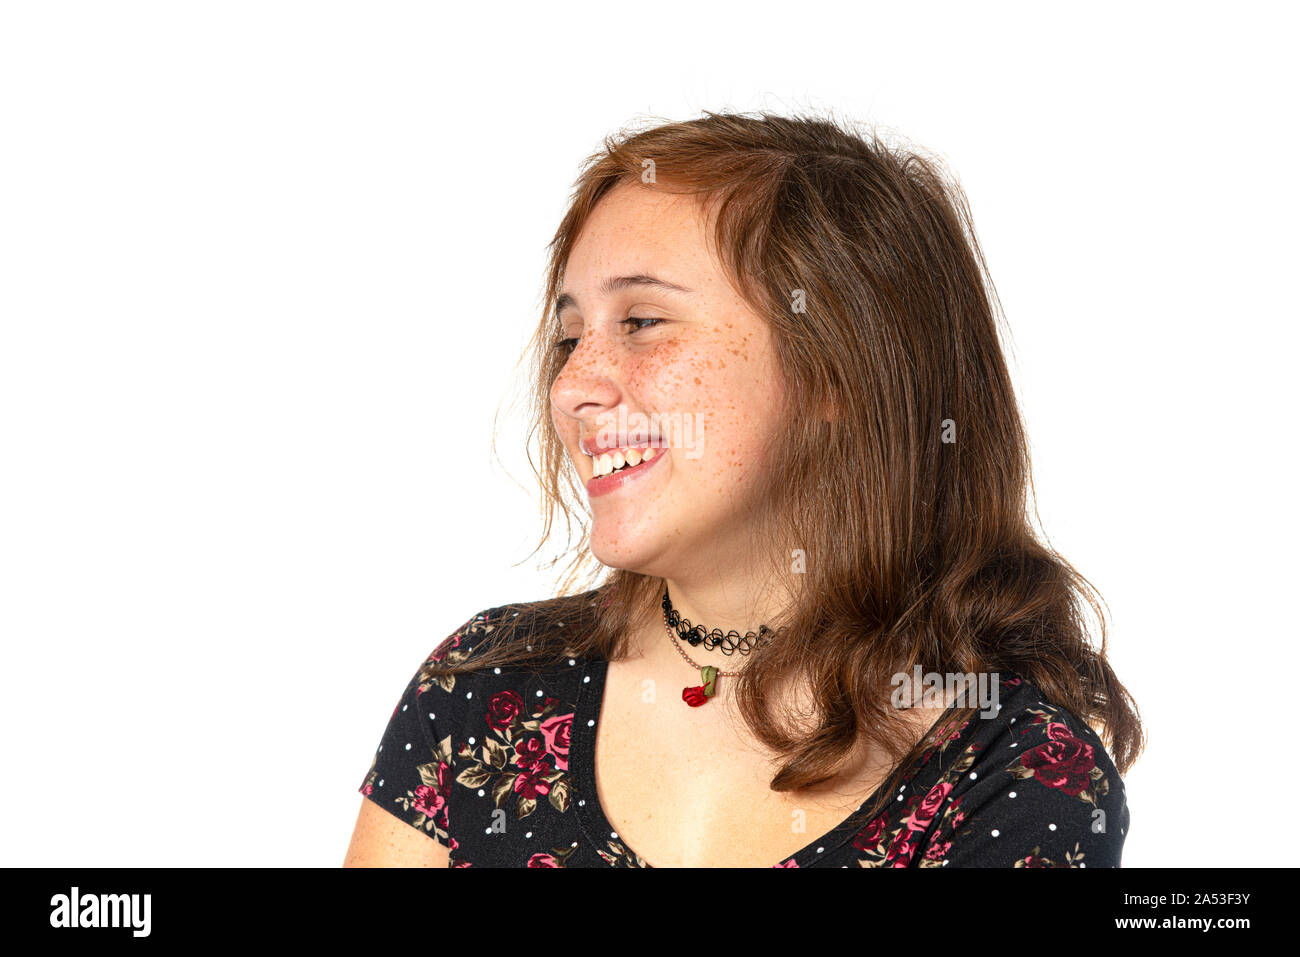 Horizontal studio shot of a happy pre-teen girl with freckles isolated on white. Stock Photo